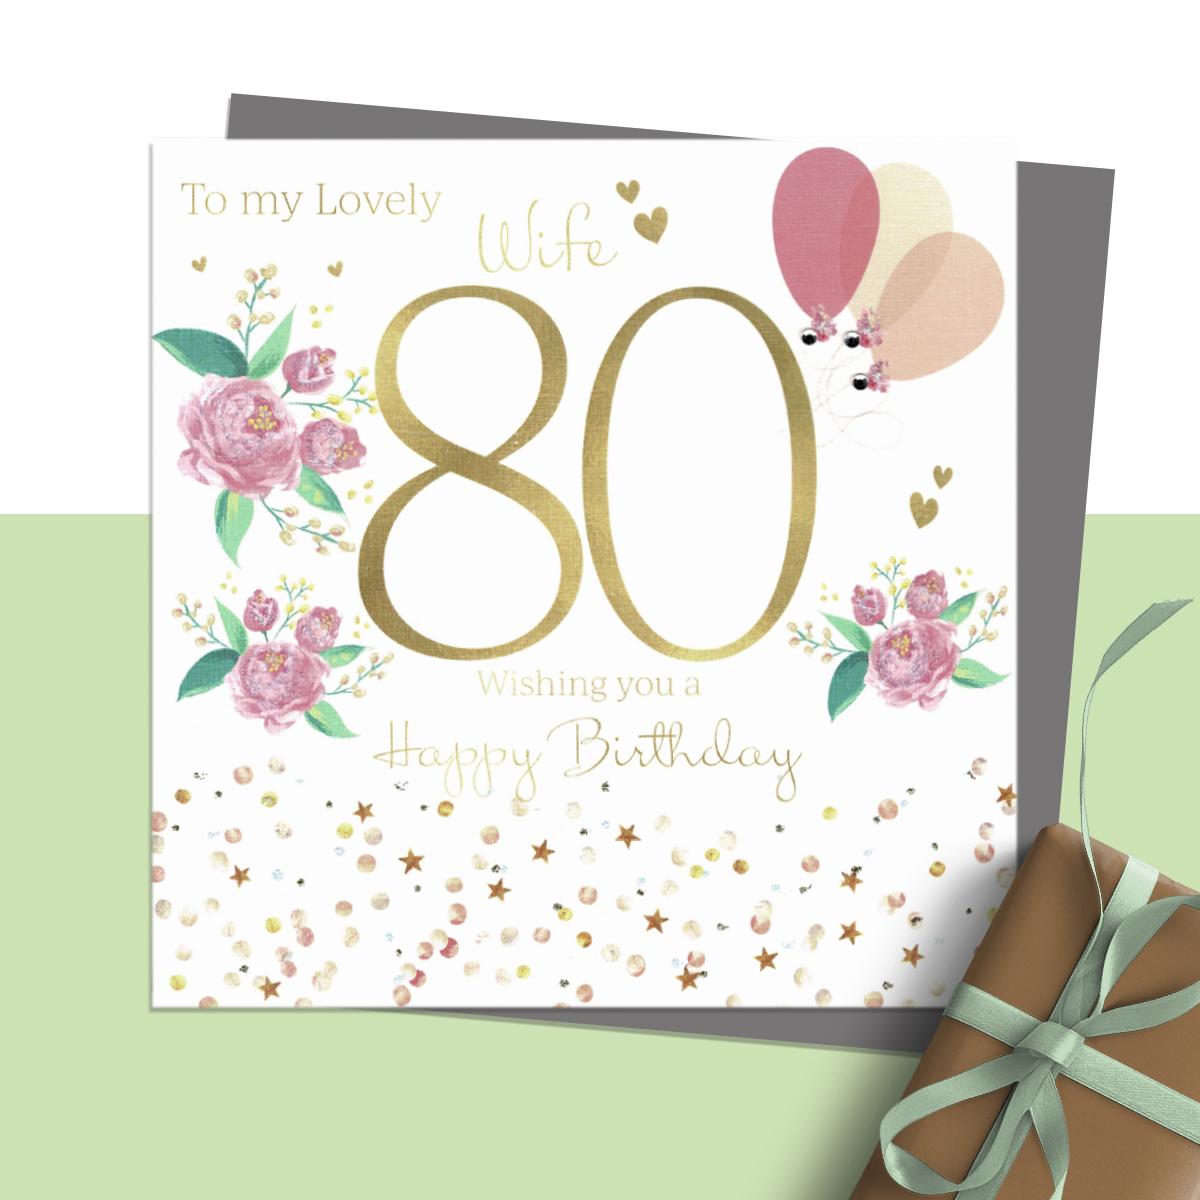 To My Lovely Wife 80 Wishing You A Happy Birthday'. Hand Finished With Sparkle And Jewel Embellishments. Blank Inside For Own Message. Complete With Silver Coloured Envelope